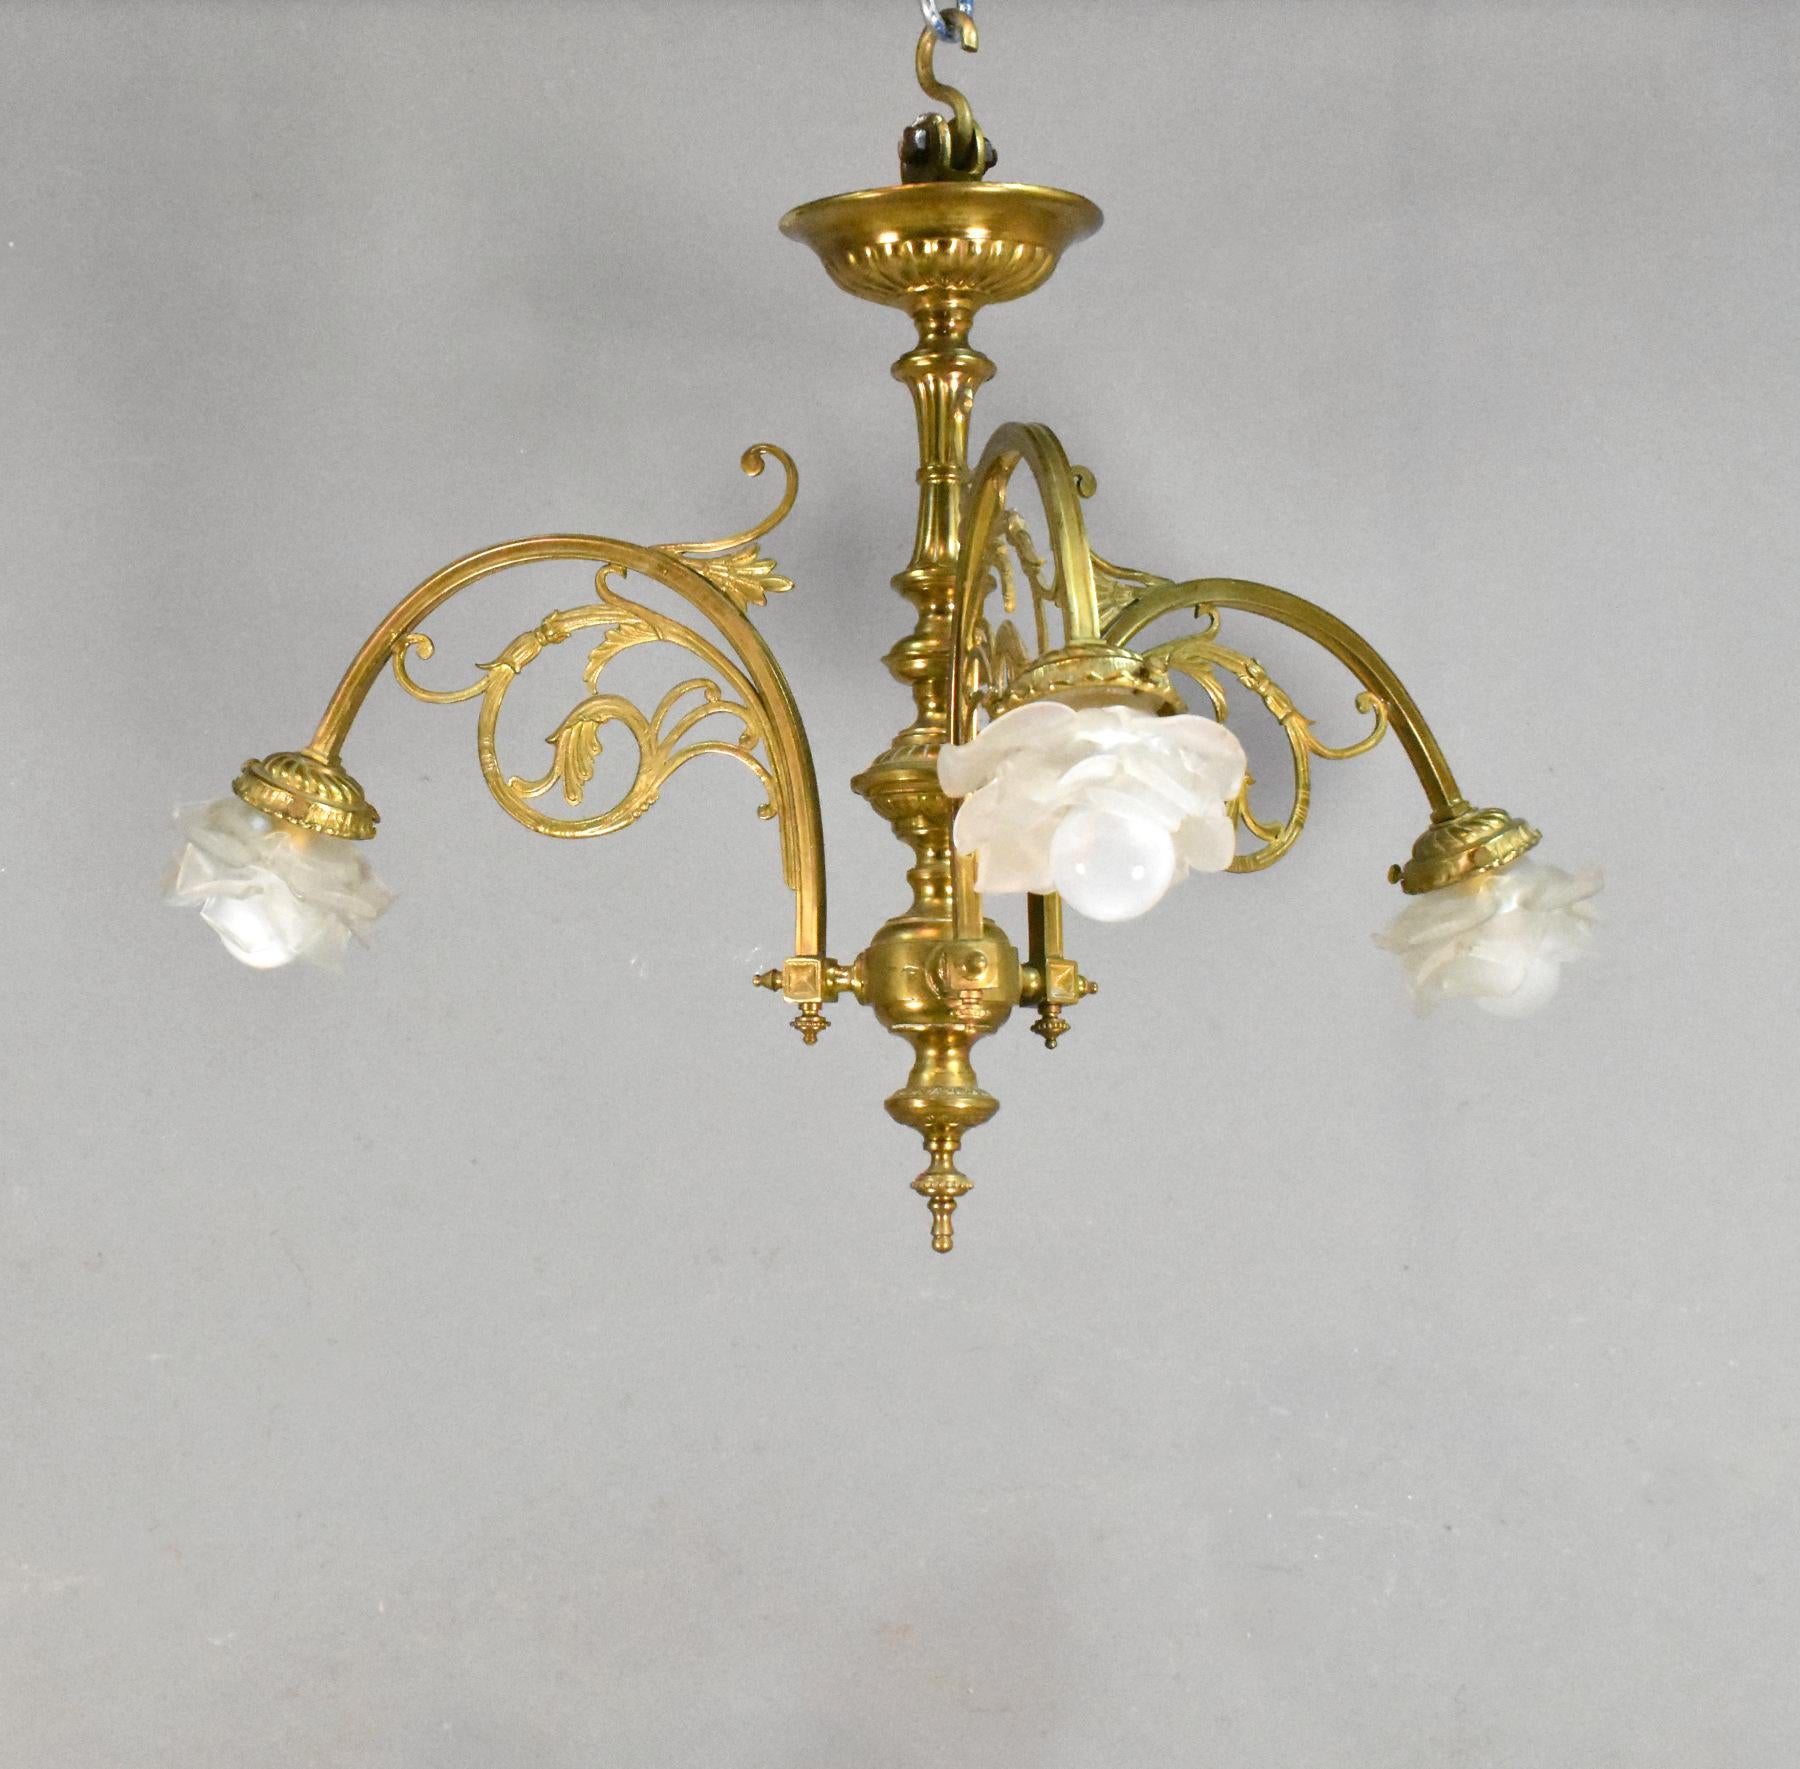 Antique French bronze 3 light chandelier

This well-proportioned three light / arm bronze chandelier has floral frosted glass light shades. 

The three bronze arms originating from the ornate central column, have out-swept floral decorations. 

A